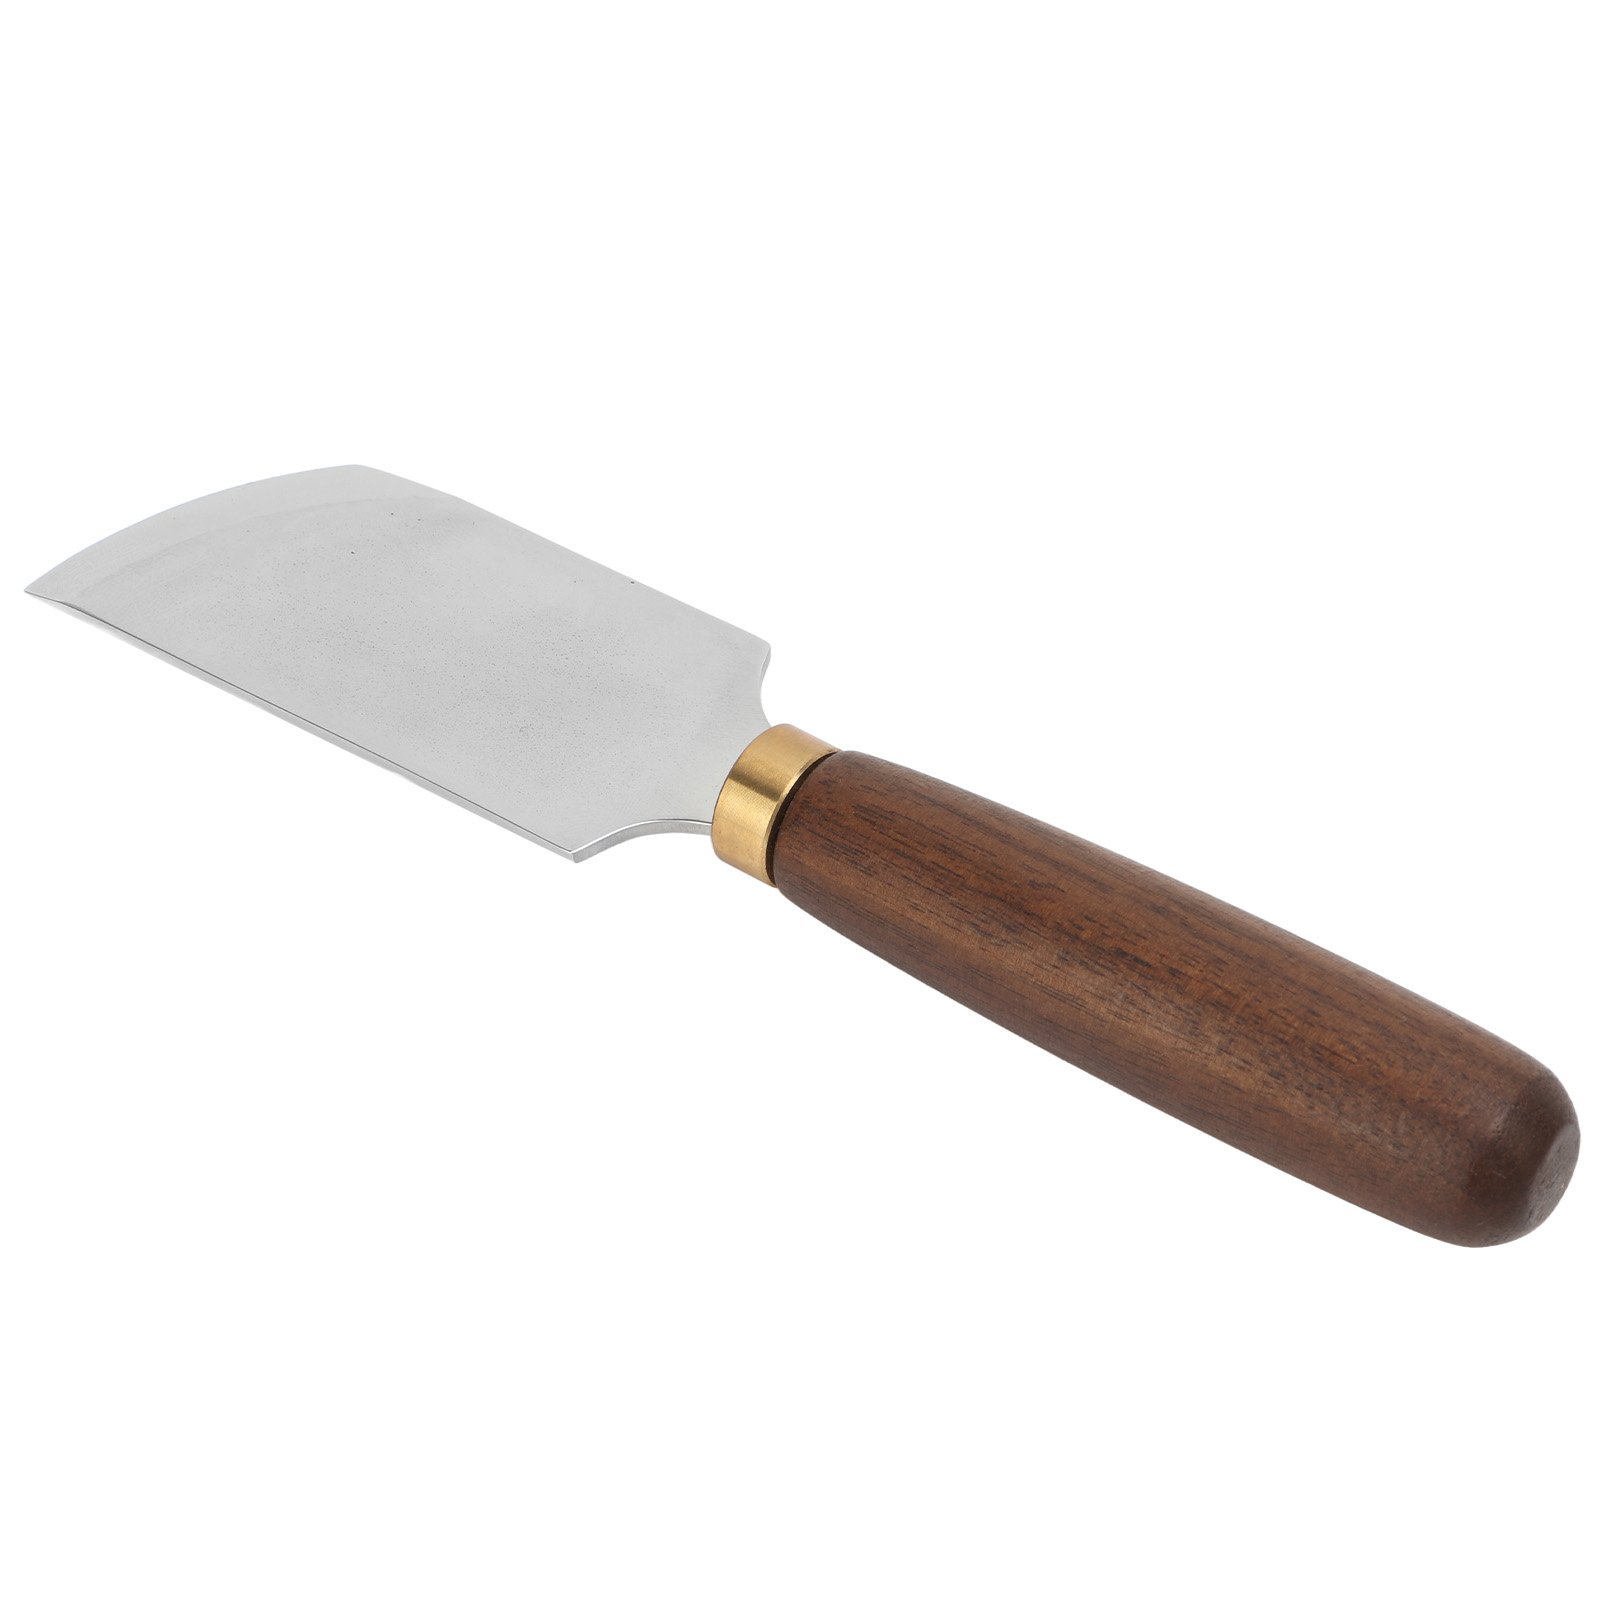 Leather Skiving Knife, Wooden Handle Bevel Leather Cutting Knife